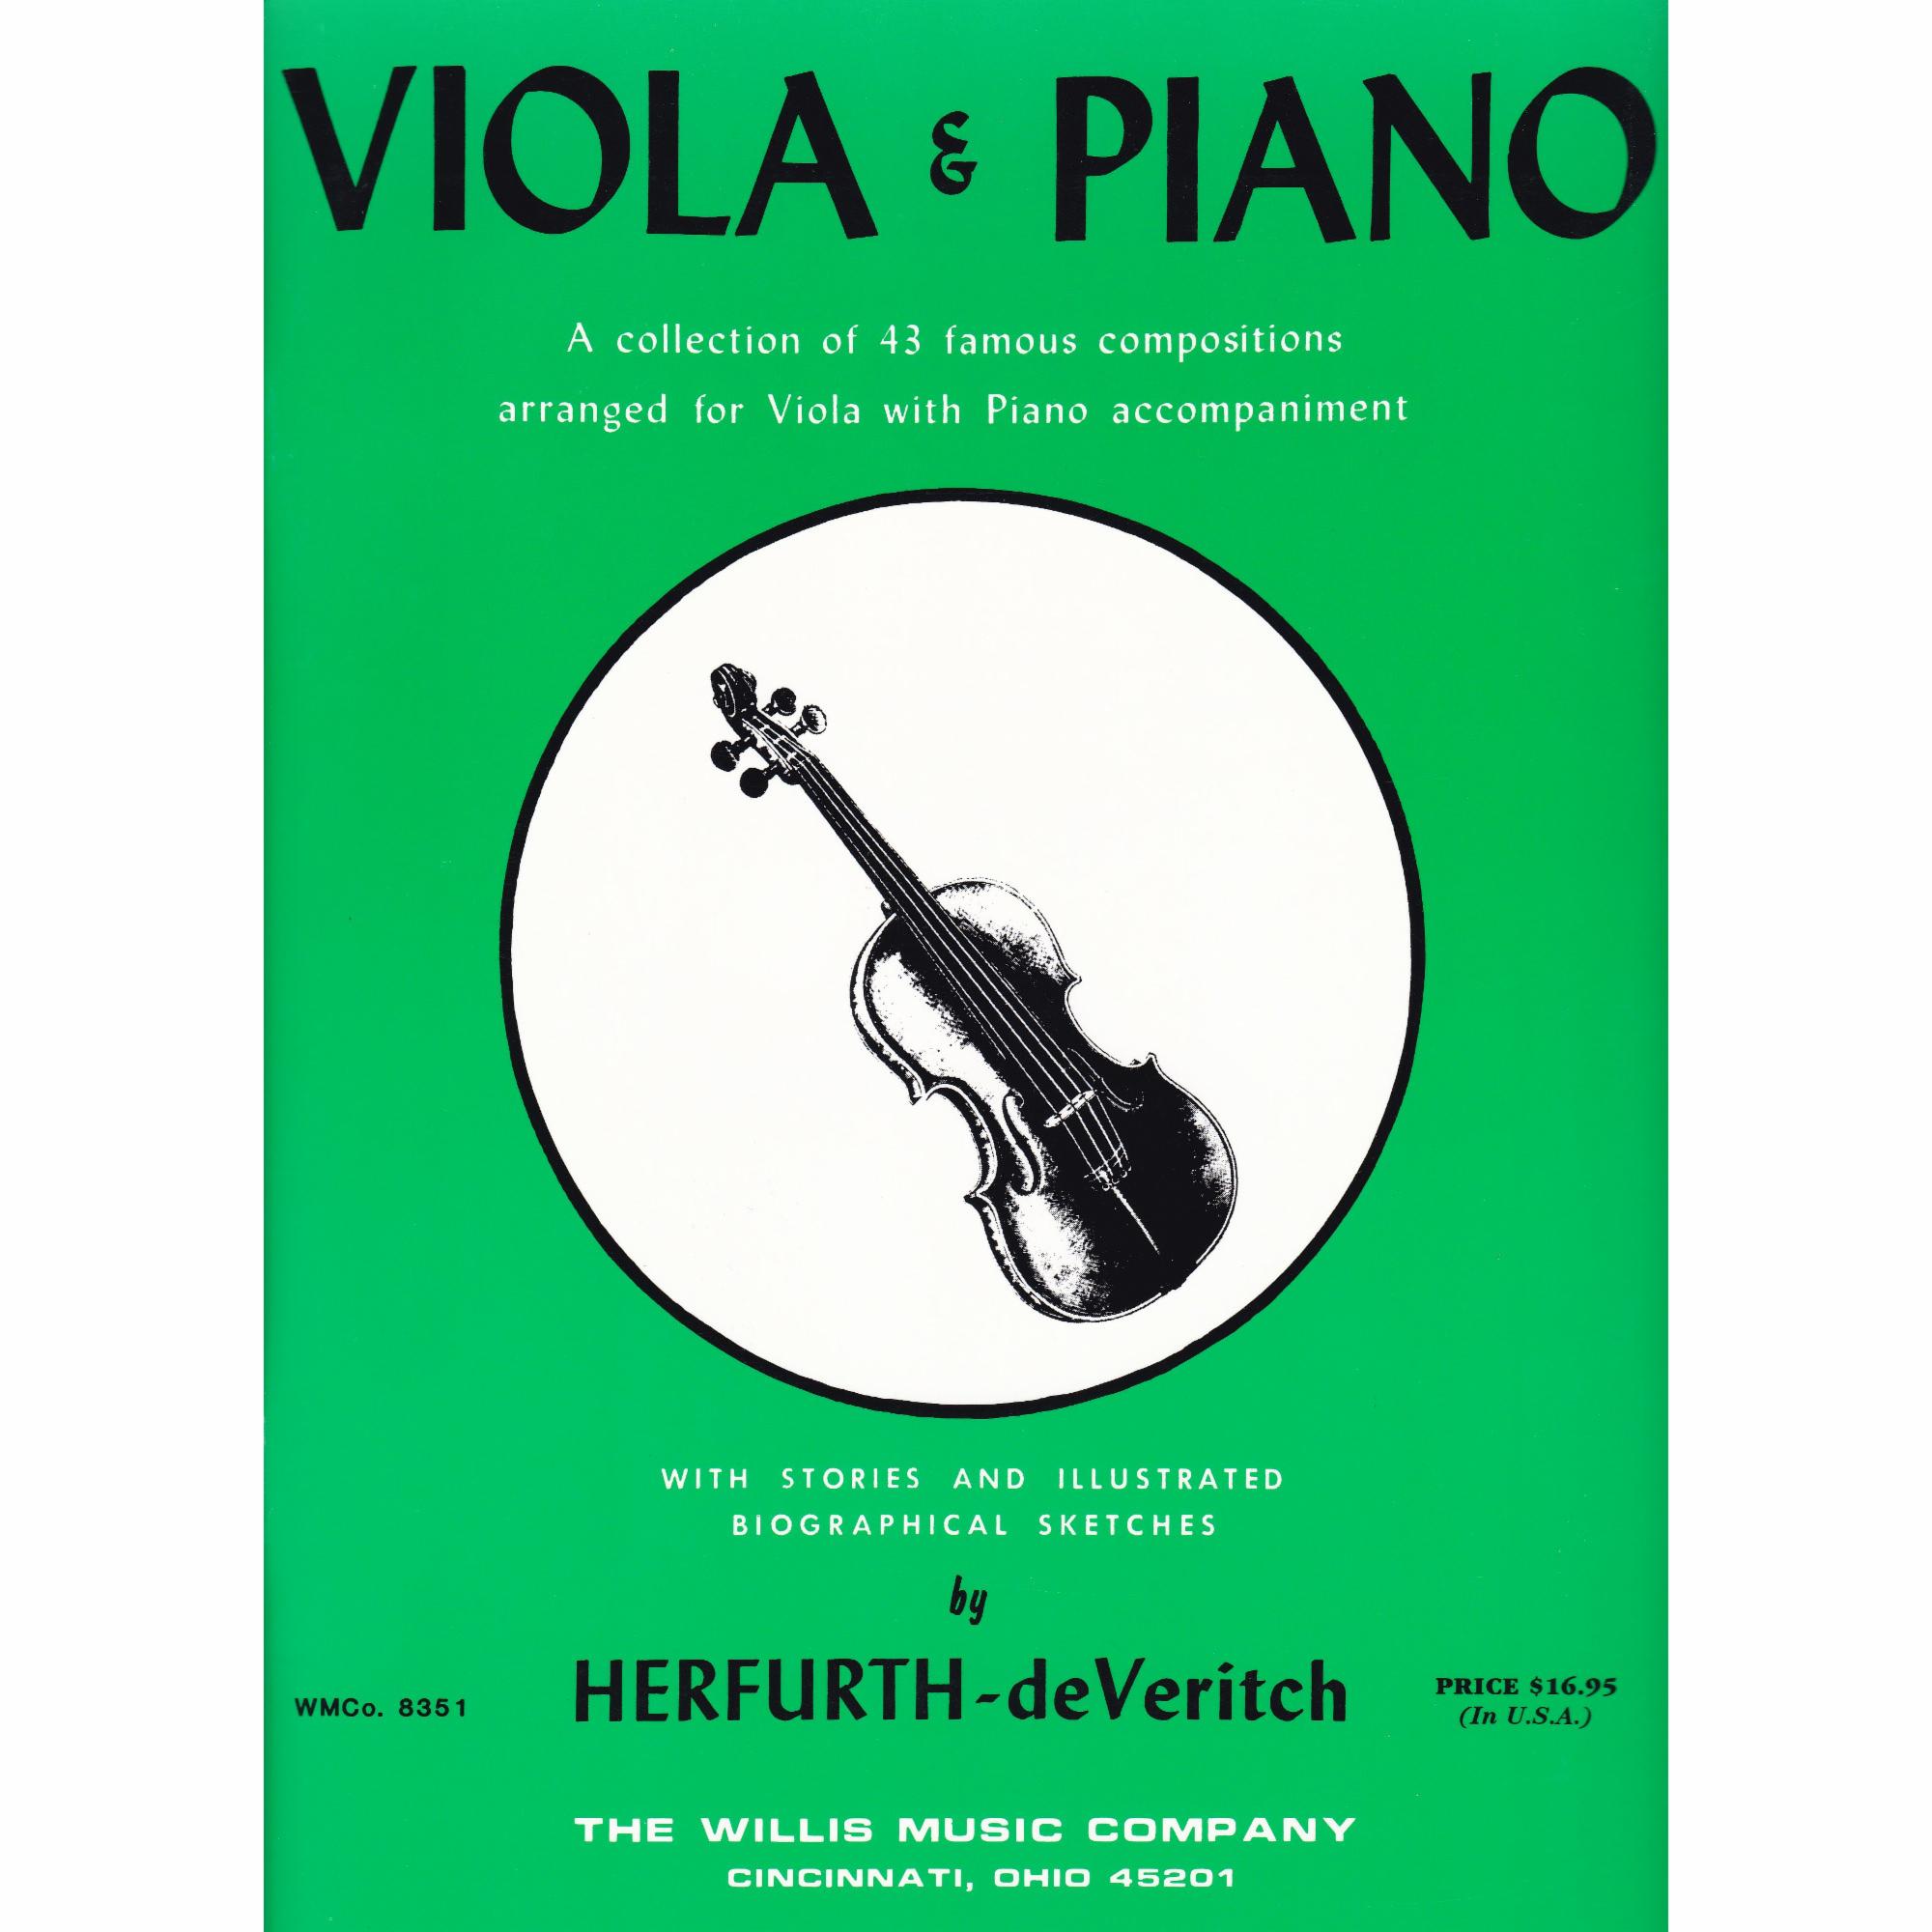 43 Famous Compositions for Viola and Piano